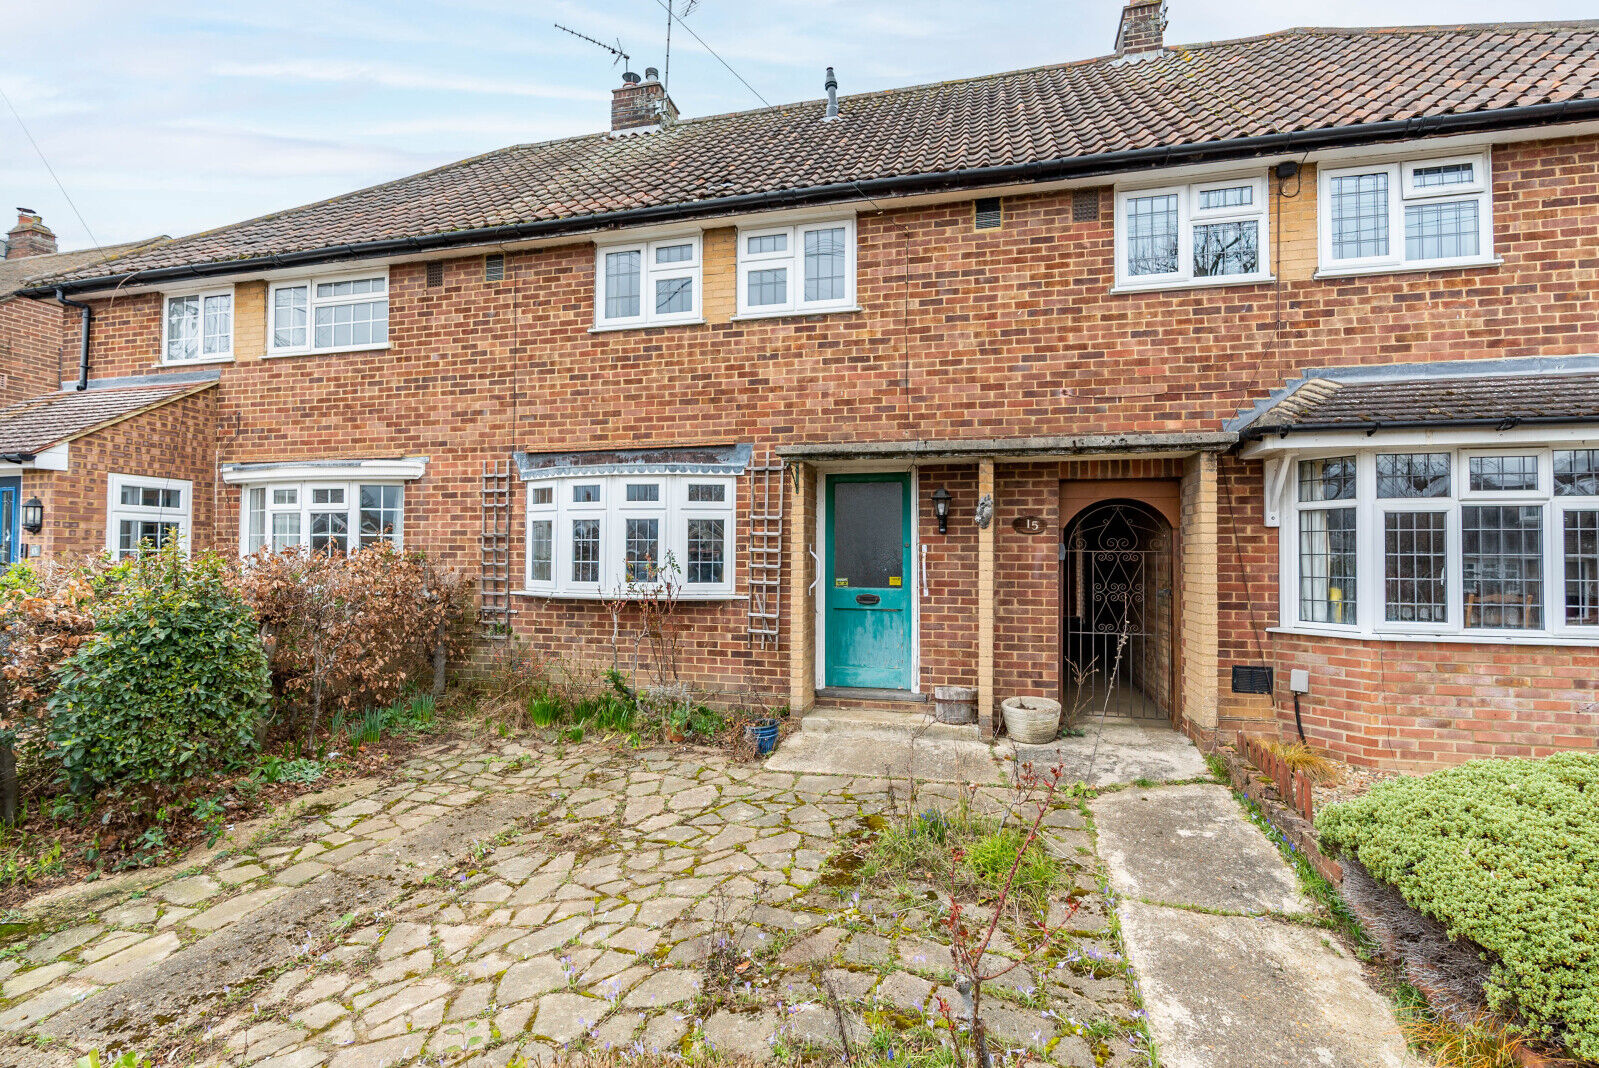 3 bedroom mid terraced house for sale Meadway, Harpenden, AL5, main image